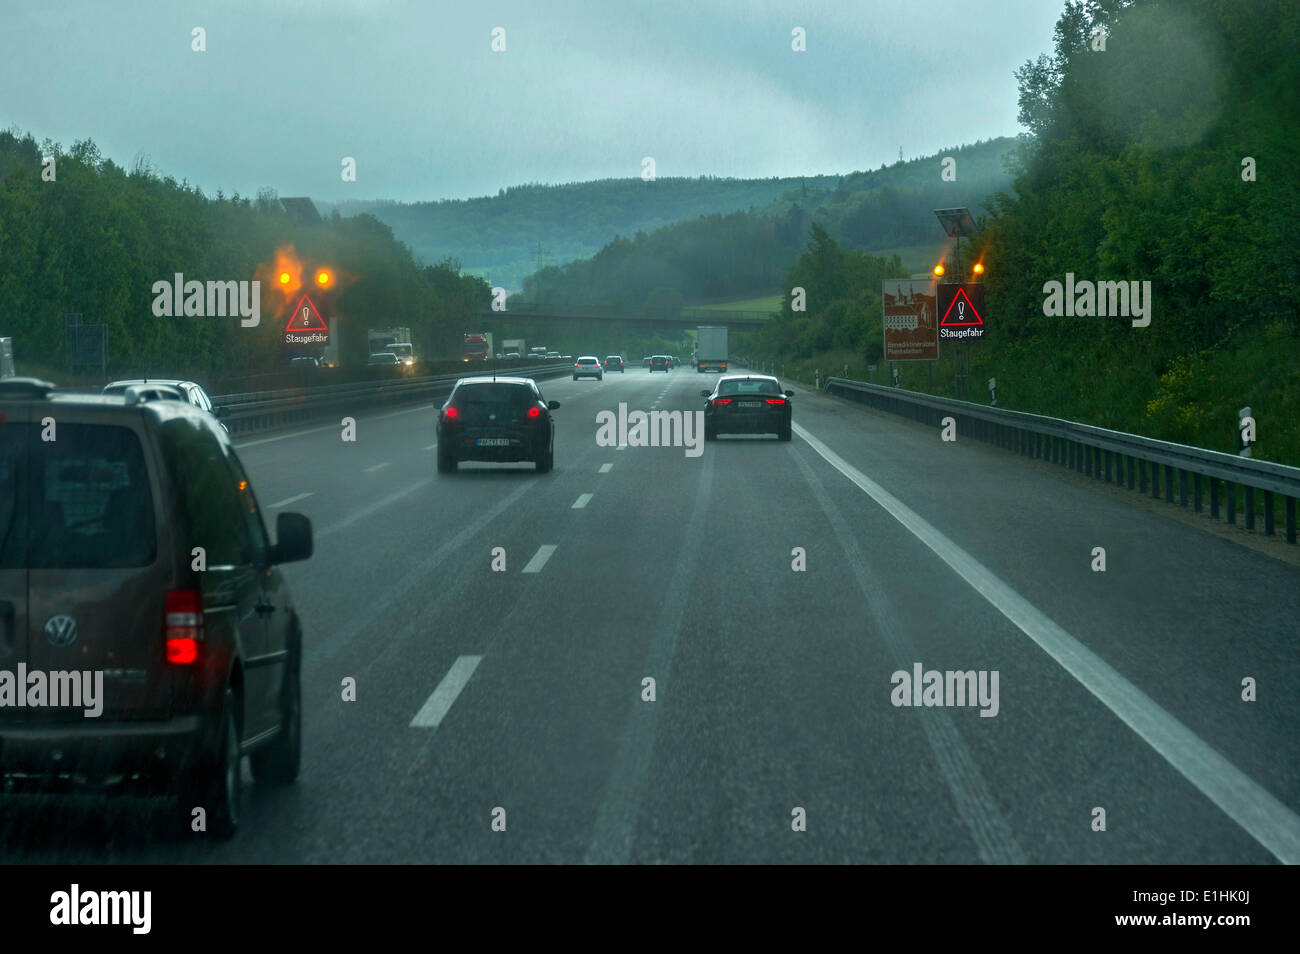 Traffic during heavy rain with poor visibility, warning sign indicating a risk of traffic jams, A9 motorway near Thalmässing Stock Photo